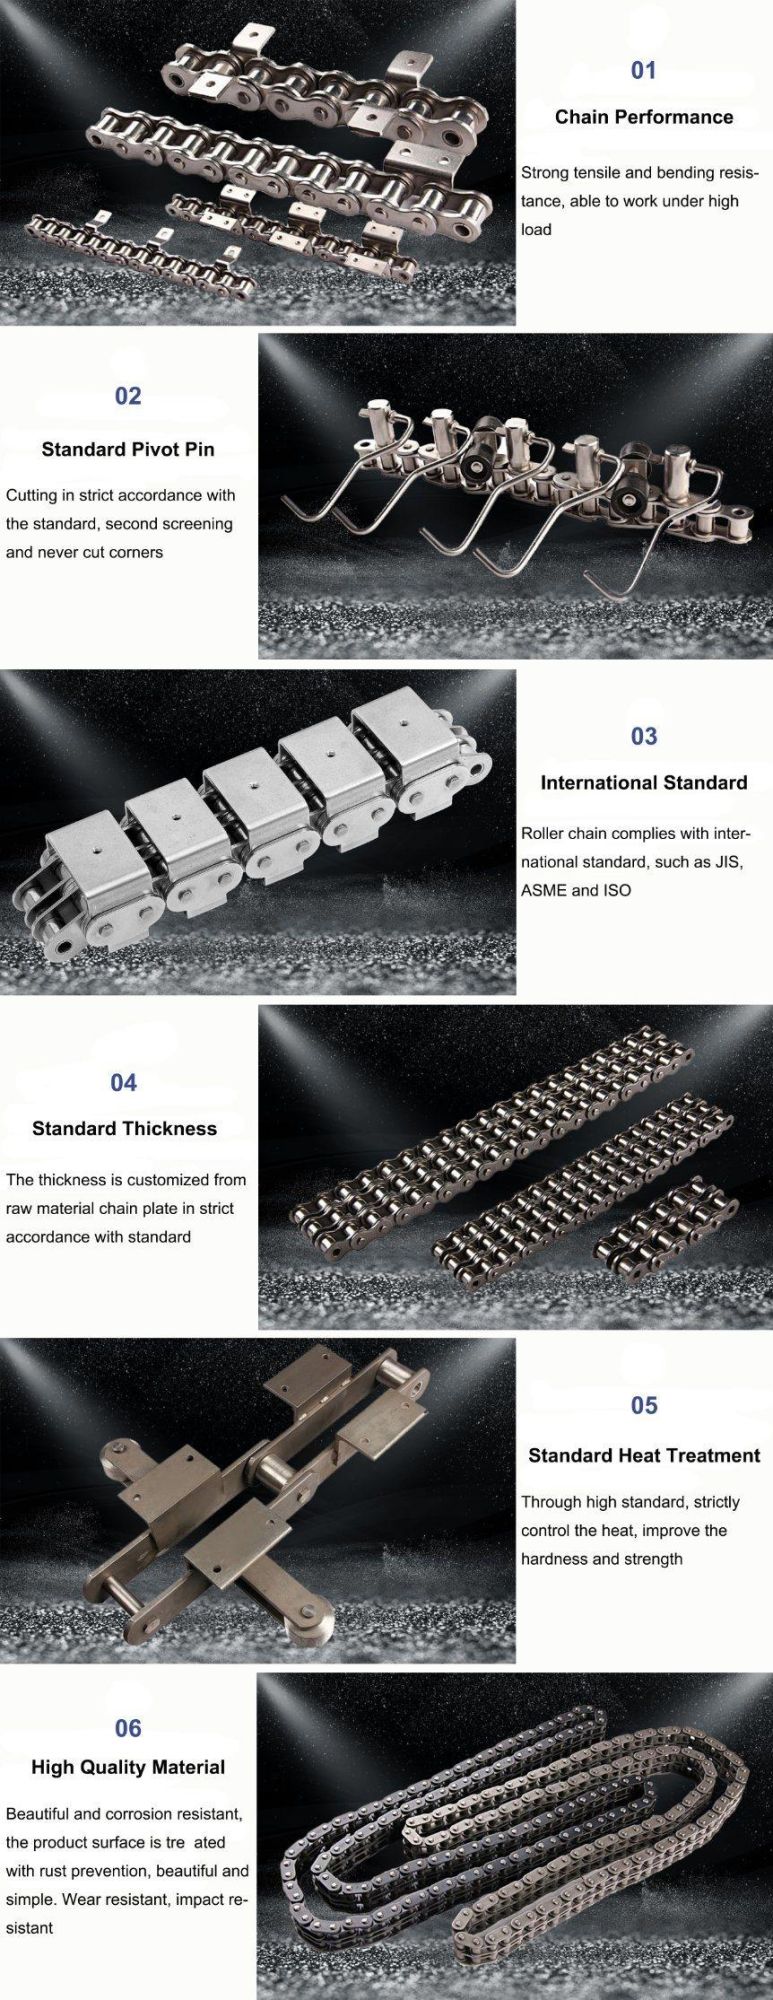 Factory Direct Sales Welded Flat Top Chain Straight Plate Transmission Conveyor Roller Chain